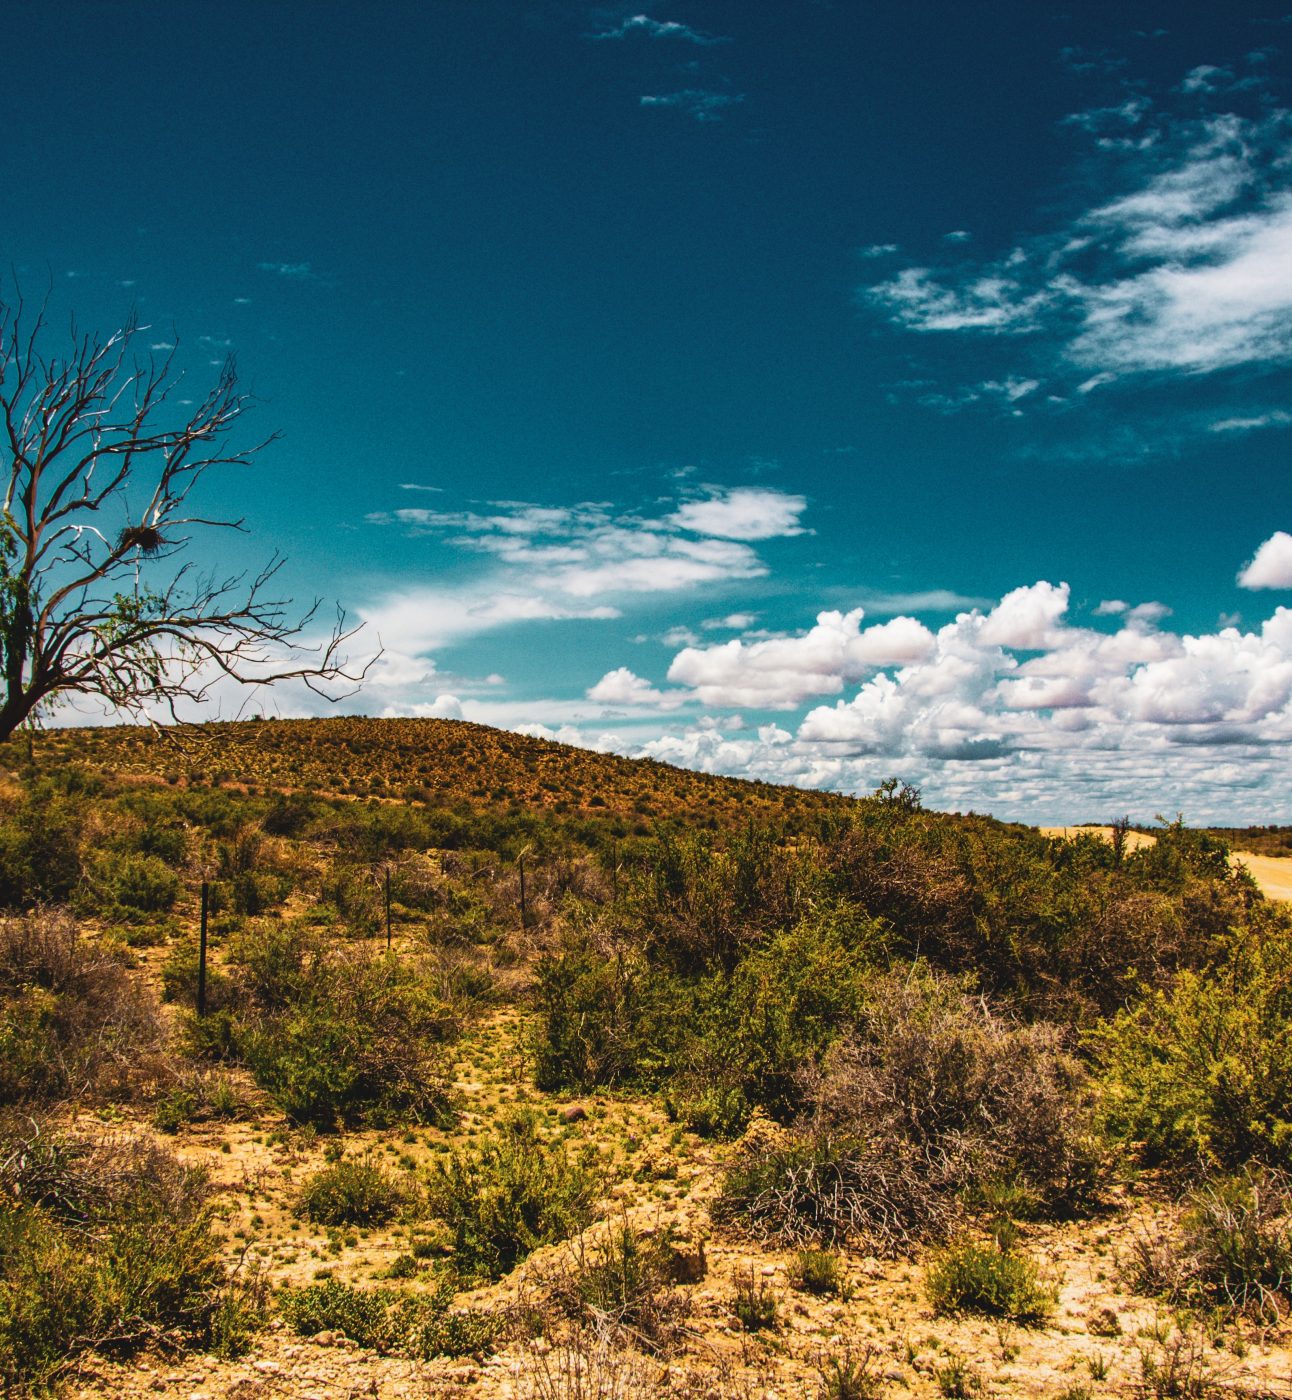 A shot of the African landscape during a drought with dry ground and a bare tree